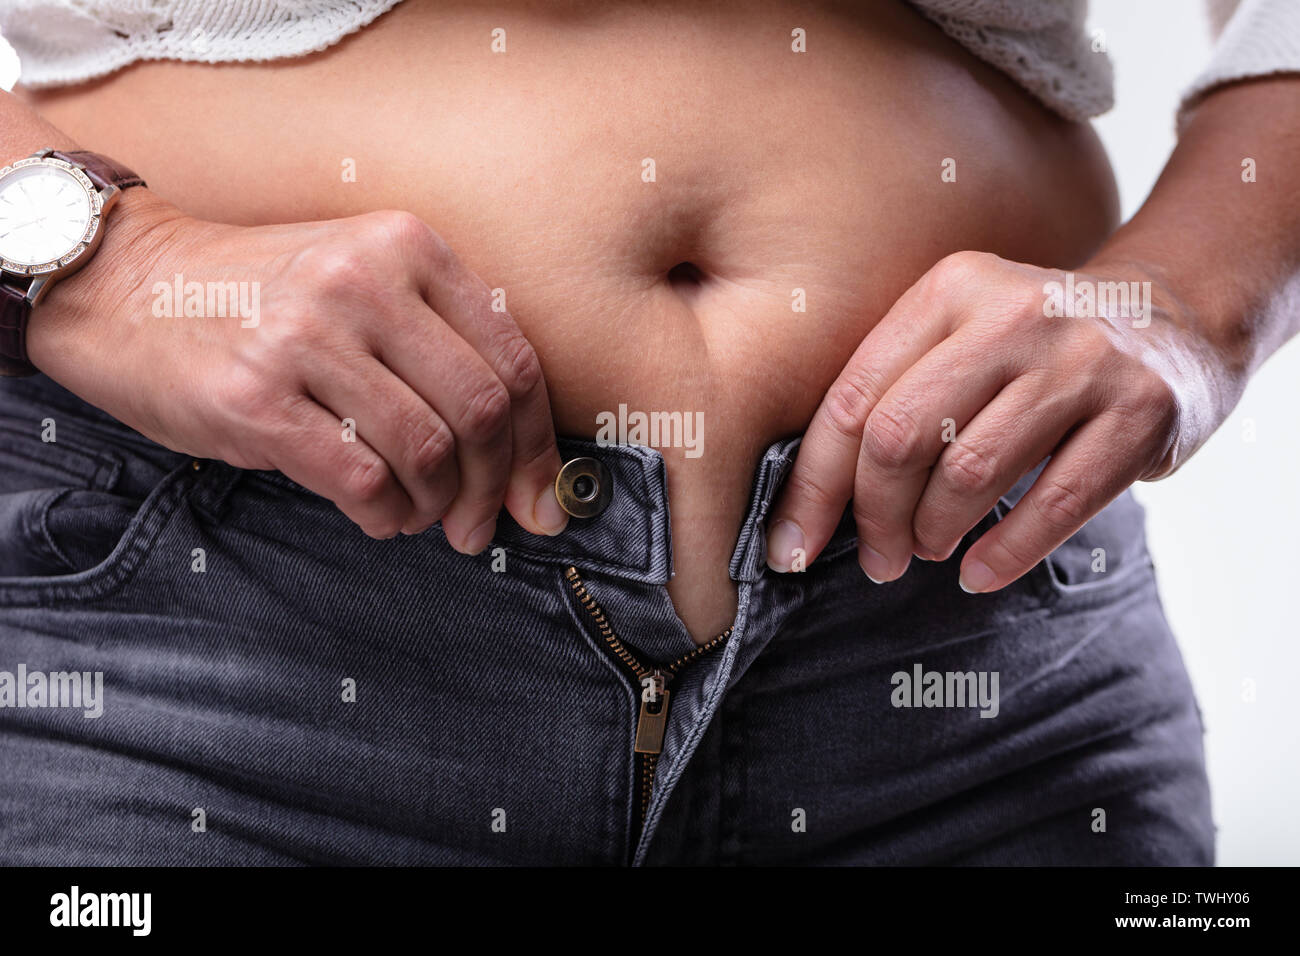 Close-up Of Woman Hands Unable To Close The Pants Due To Gaining Fat On Hips. Stock Photo